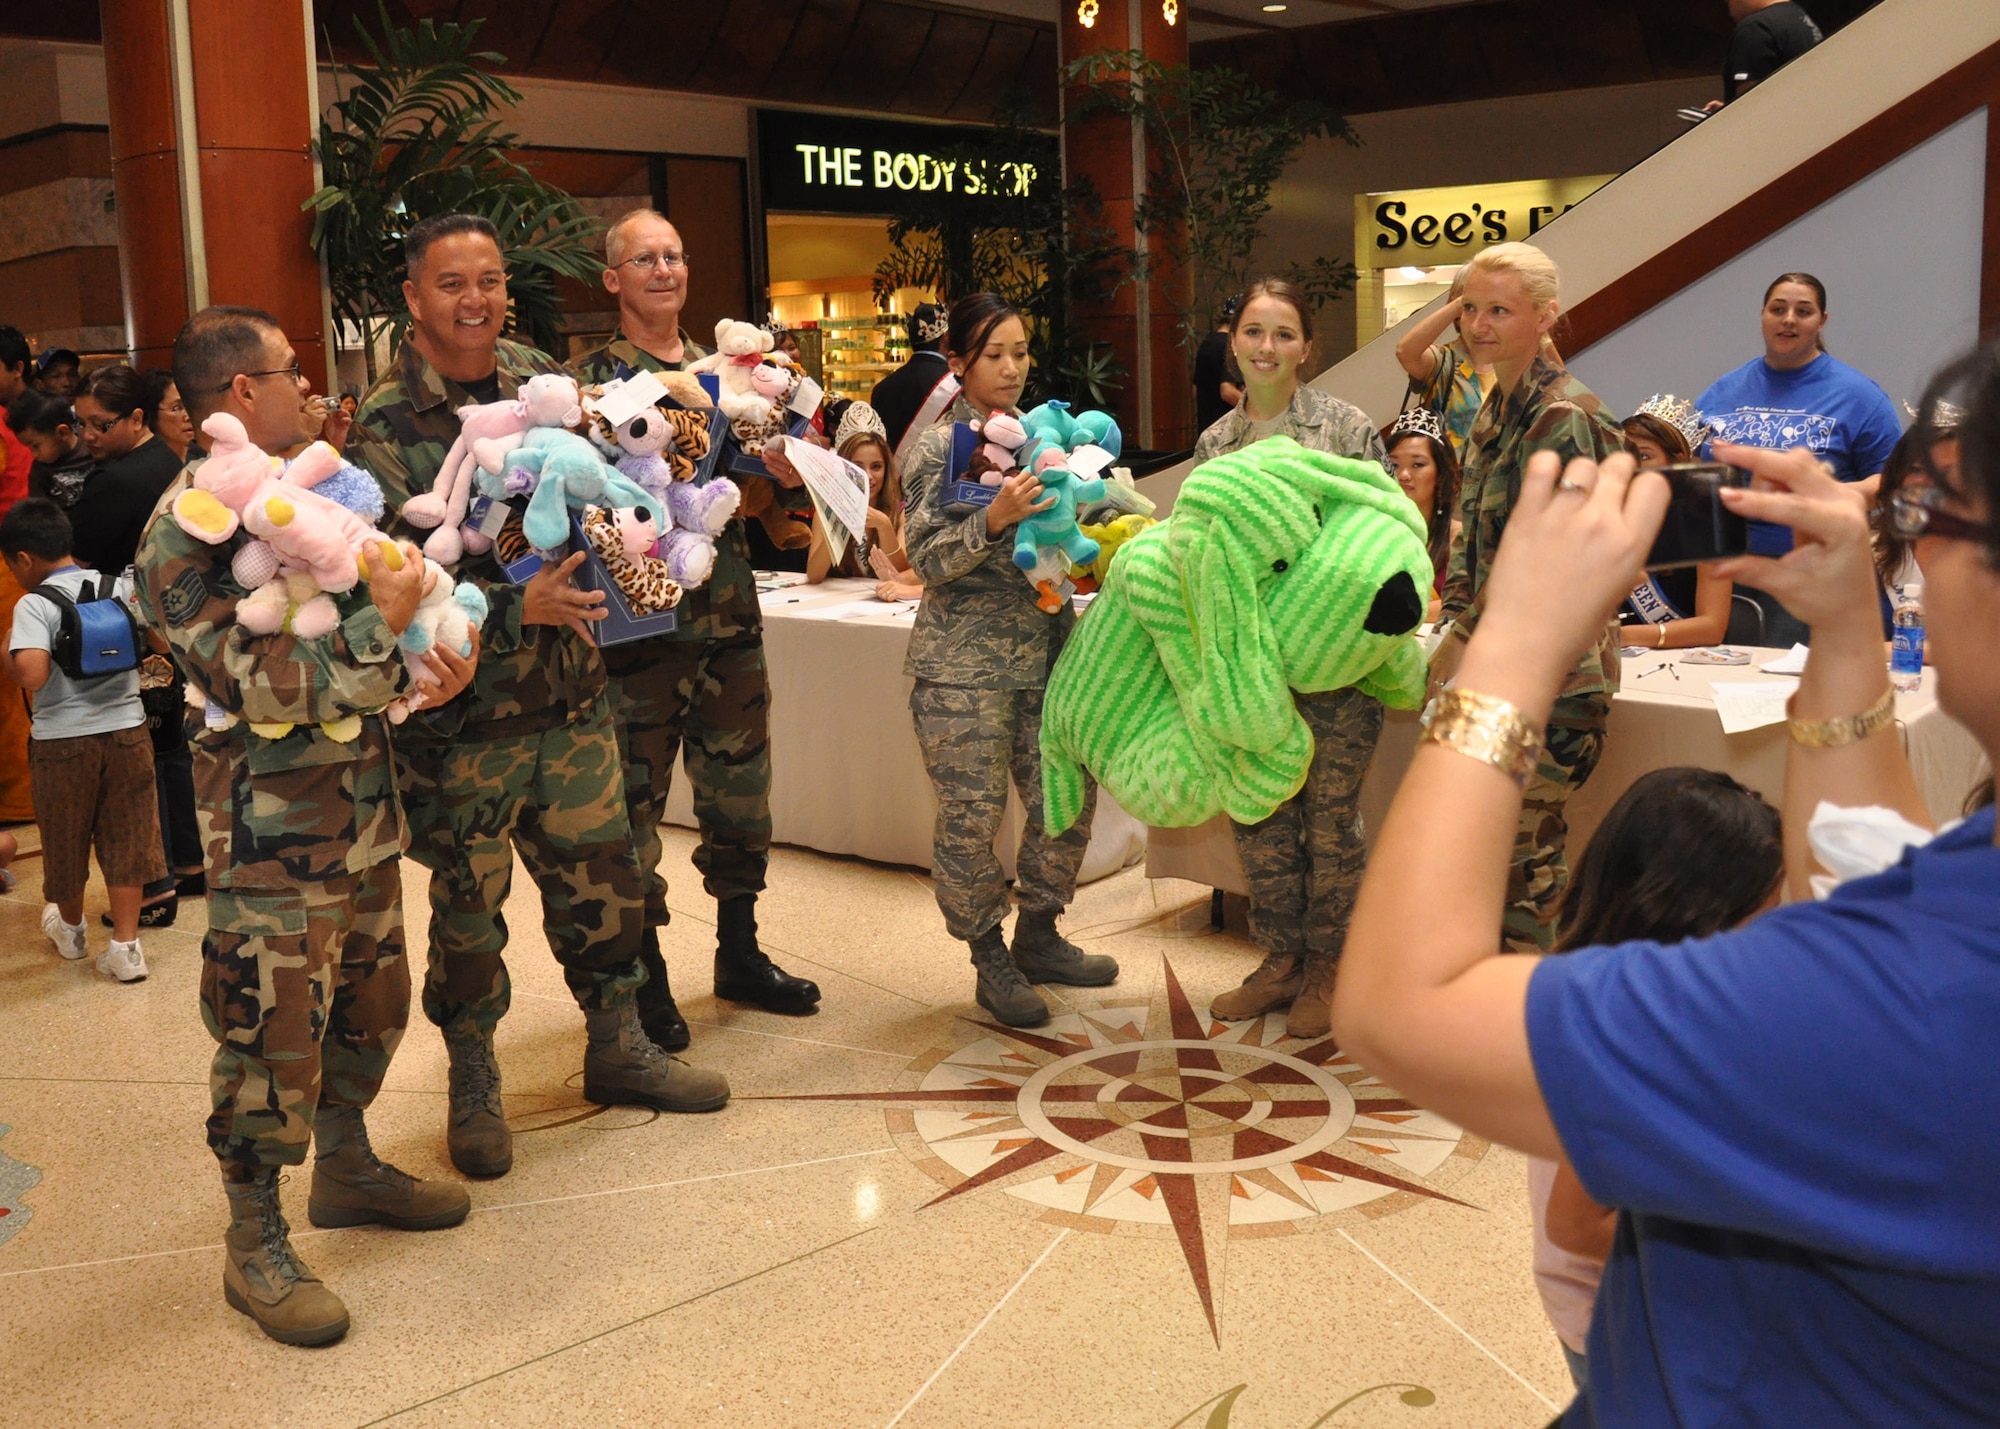 Members of the 624th Regional Support Group were treated like visiting celebrities when they brought in their donations of stuffed animals for the 12th Annual Teddy Bear Round-up and Family Resource Fair April 4 at Pearlridge Shopping Center, Aiea, Hawaii. The drive was in support of April Child Abuse Prevention Month. The 42 bears brought by the Air Force Reservists were added to a growing pile in the center of the mall that are destined to go to local children and families who are in crisis and in need of special attention. (Air Force photo/Master Sgt. Daniel Nathaniel)